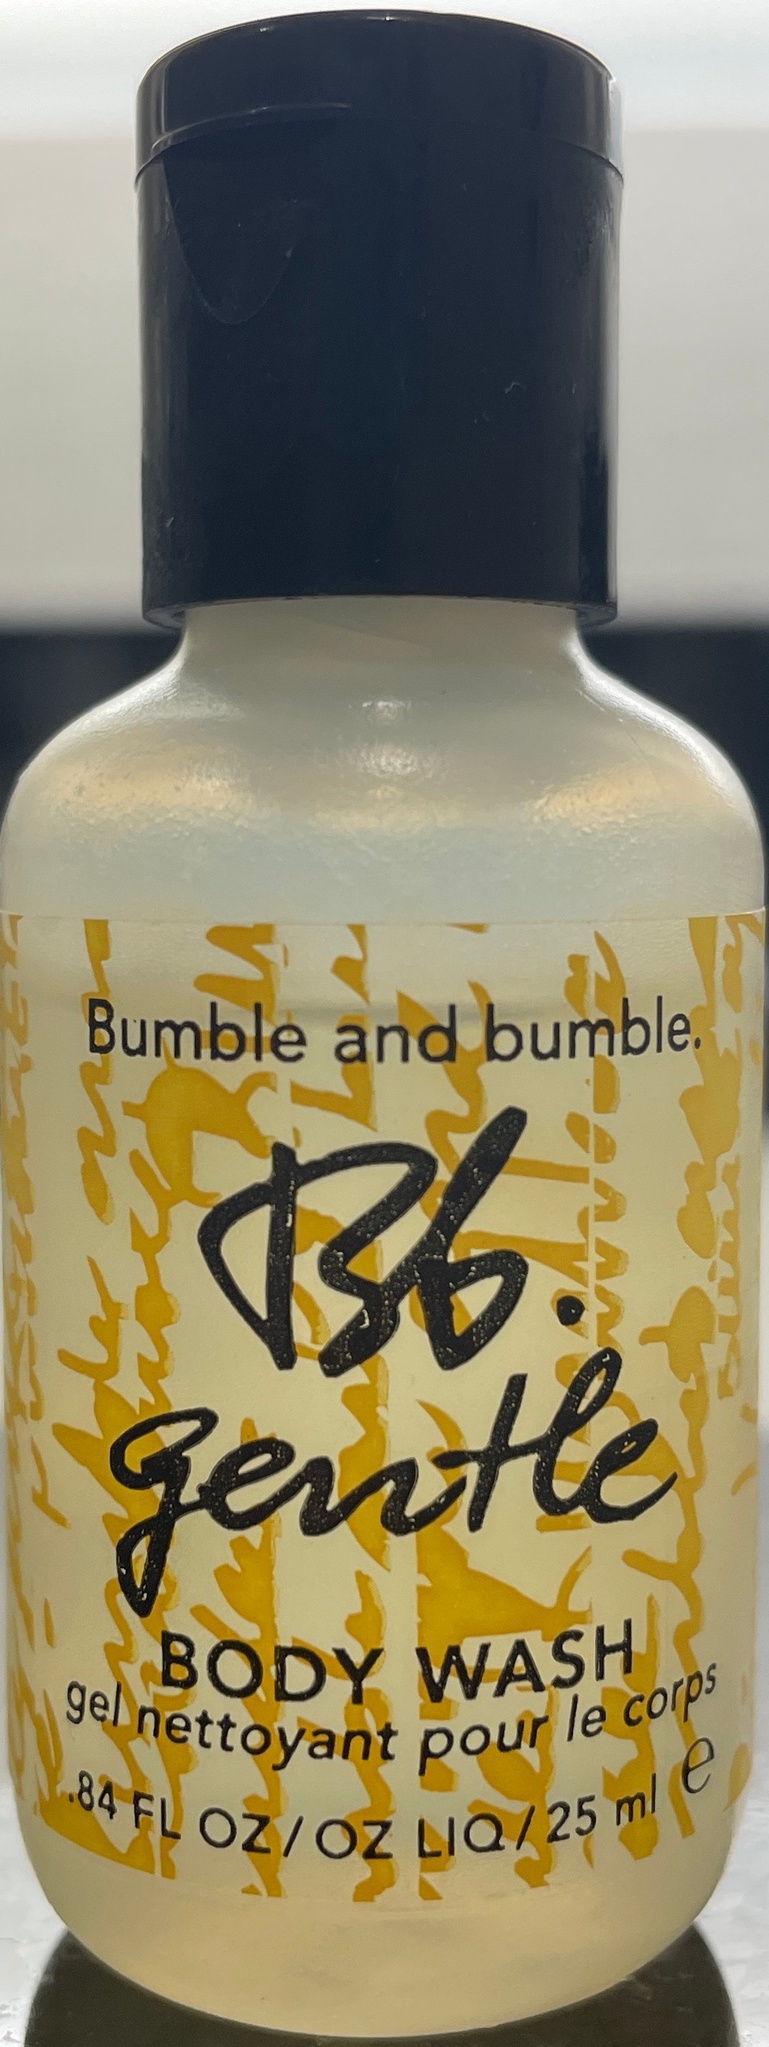 Bumble And Bumble Gentle Body Wash